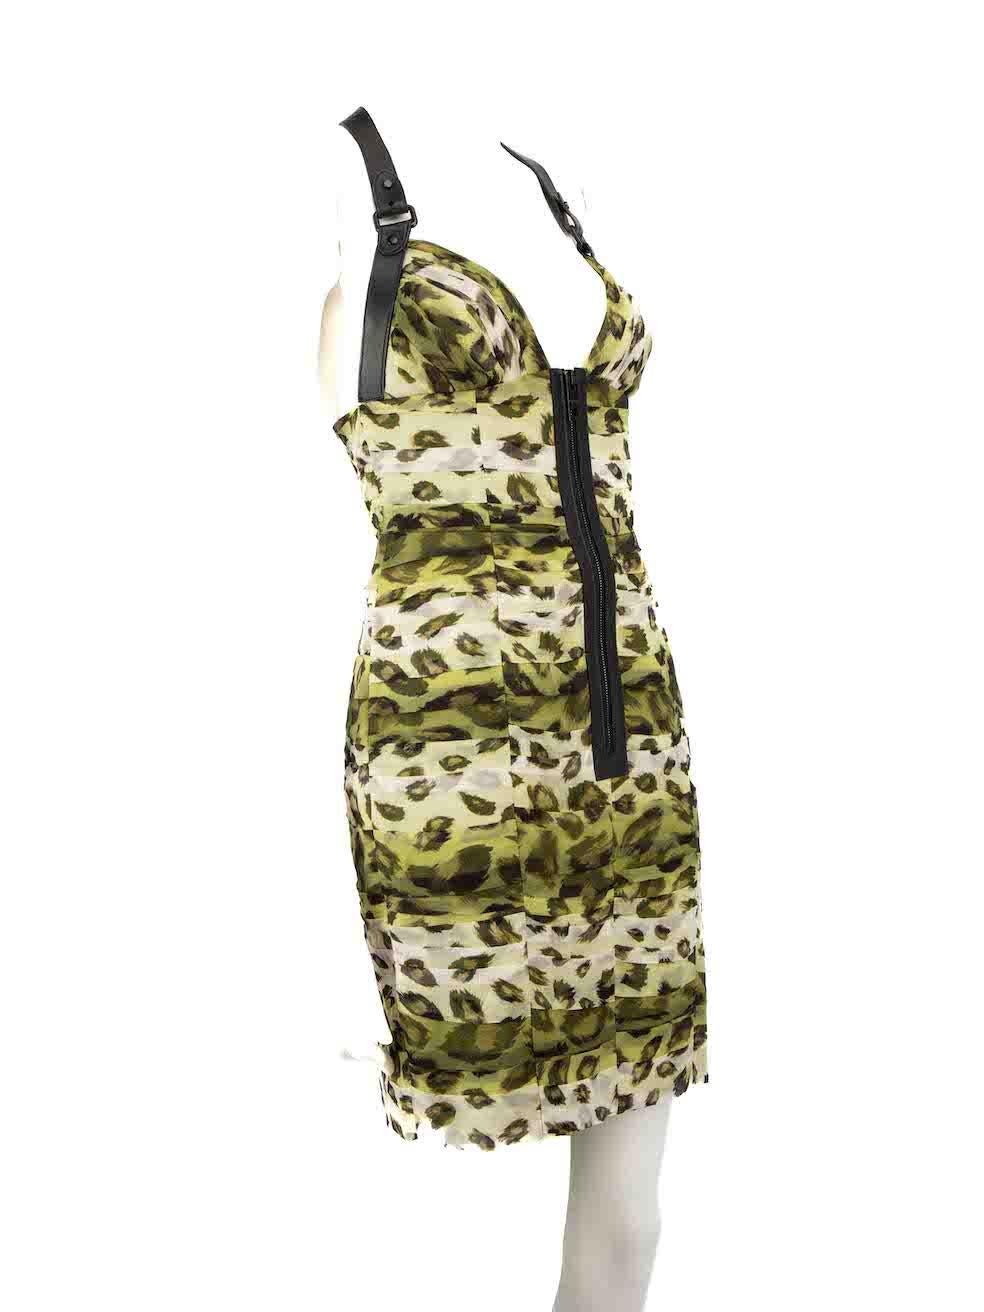 CONDITION is Very good. Minimal wear to dress is evident. Minimal wear to the front with a small pluck to the weave on this used Burberry Prorsum designer resale item.
 
 
 
 Details
 
 
 Green
 
 Silk
 
 Mini bodycon dress
 
 Sweetheart neckline
 
